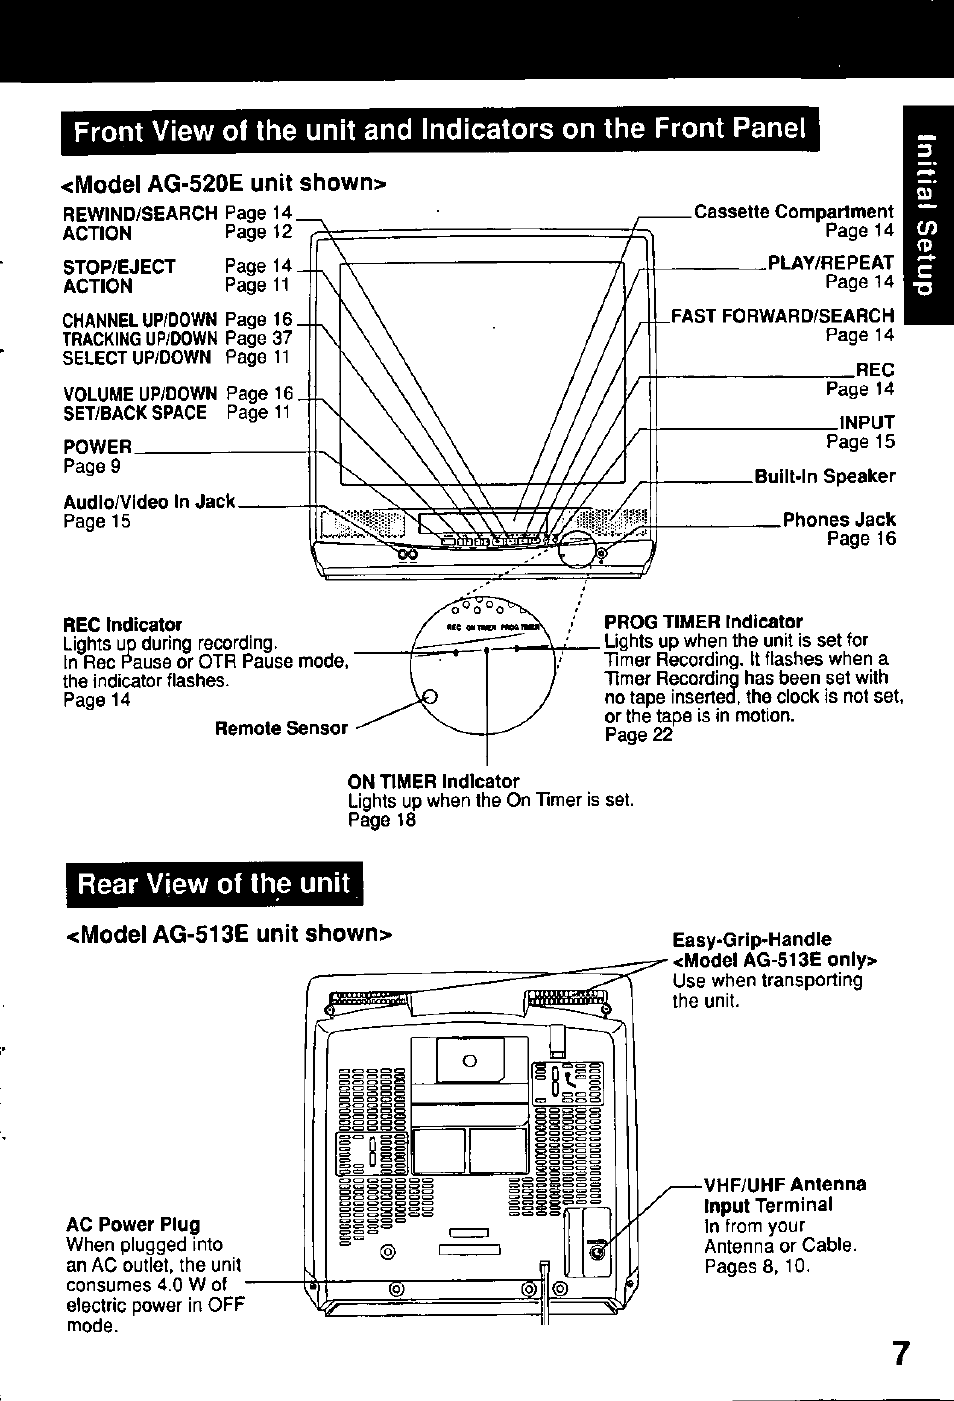 Model ag-520e unit shown, Rear view of the unit, Model ag-513e unit shown | Panasonic Combinatin VCR AG-513E User Manual | Page 7 / 40